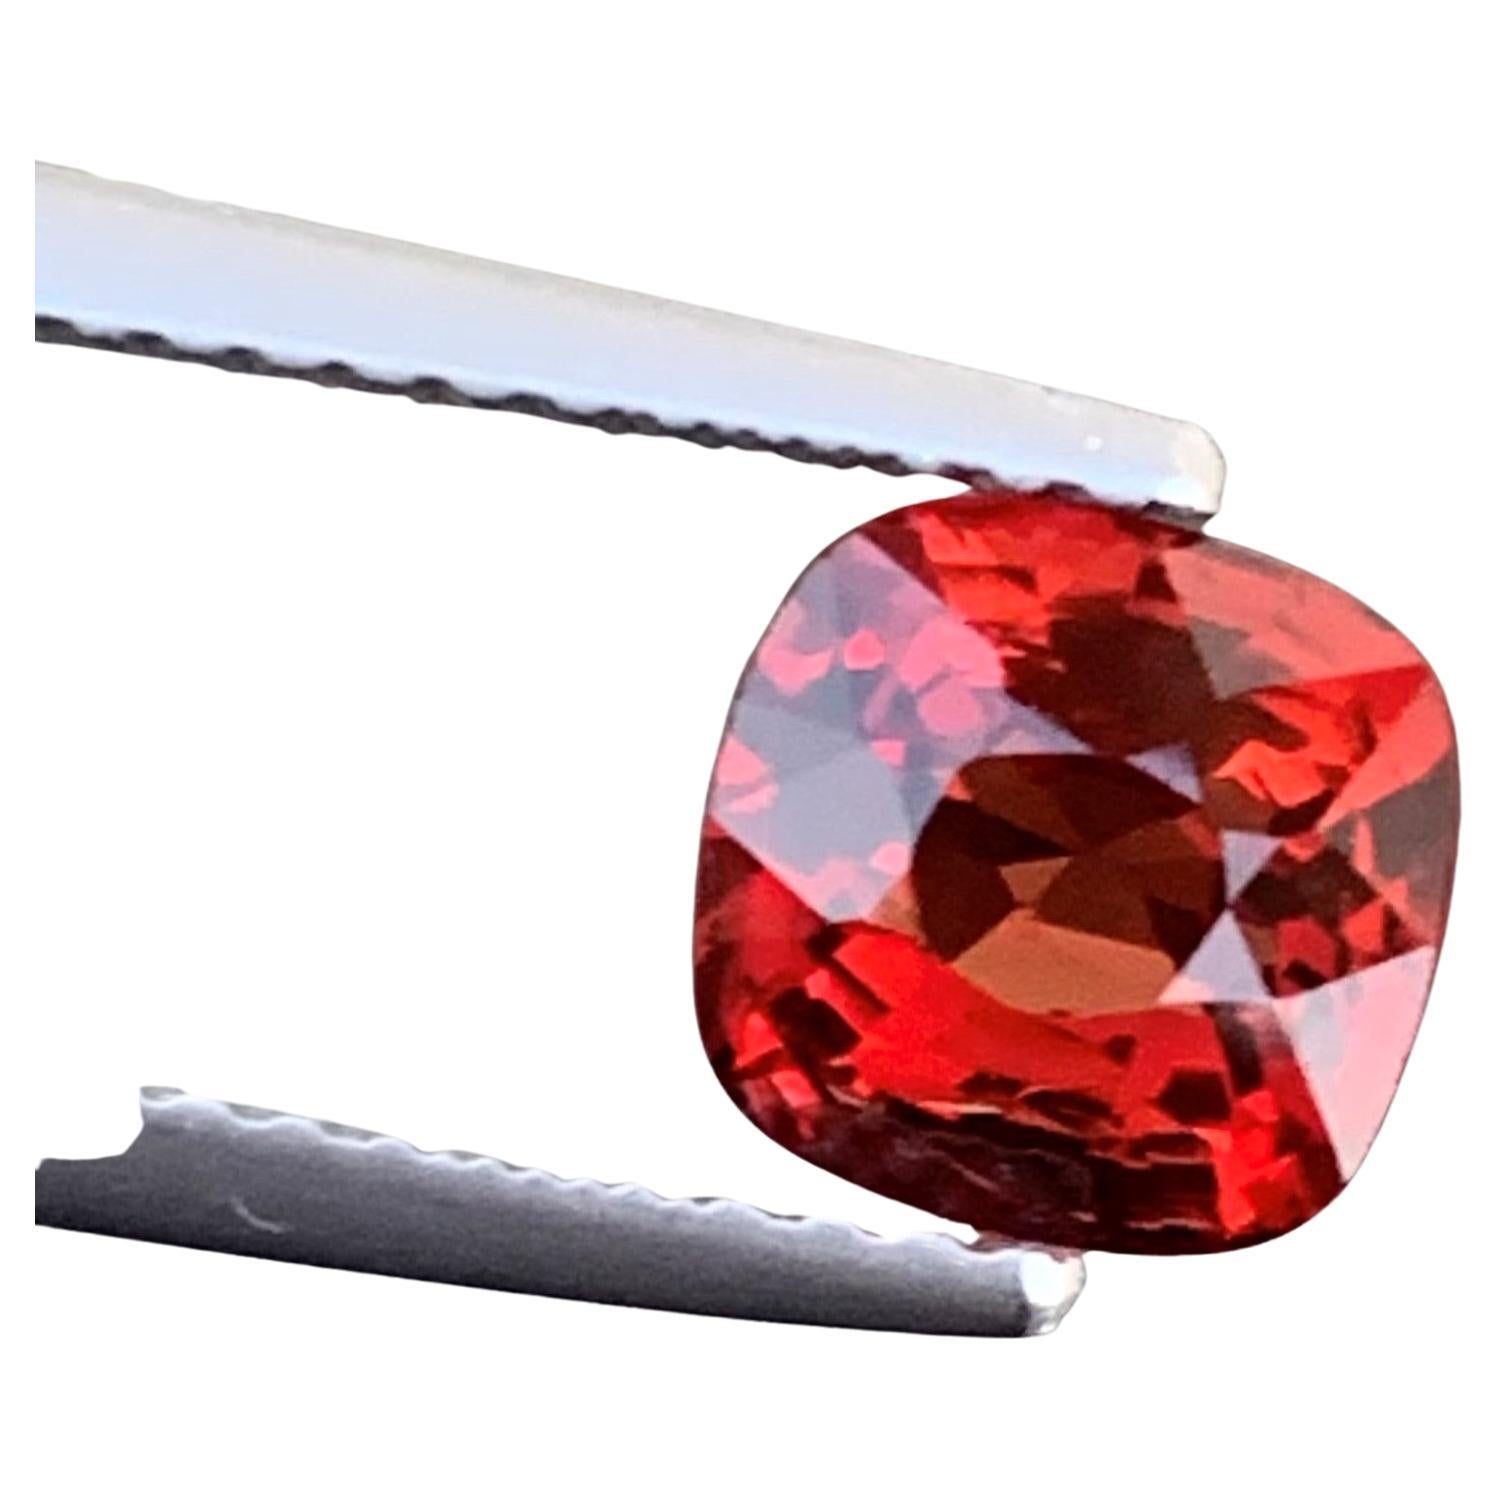 Charming 1.25 Carat Cushion Cut Loose Natural Red Spinel from Burma Myanmar